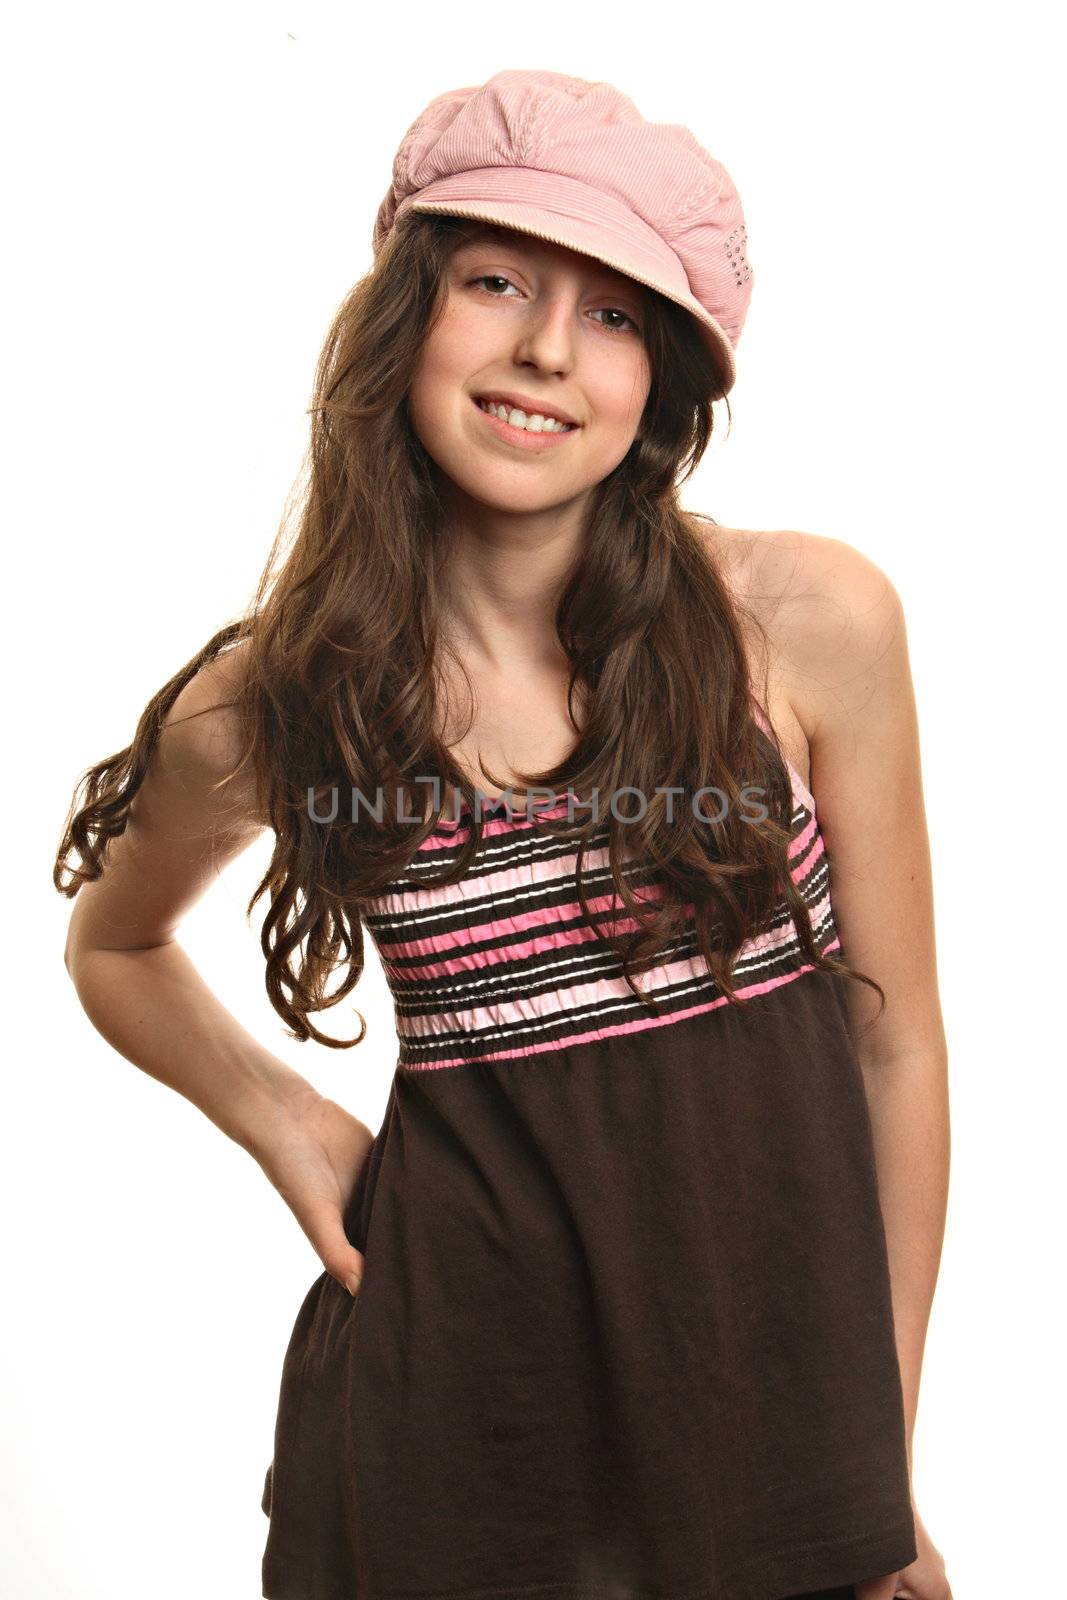 The girl in a pink cap smiles and looks in a camera